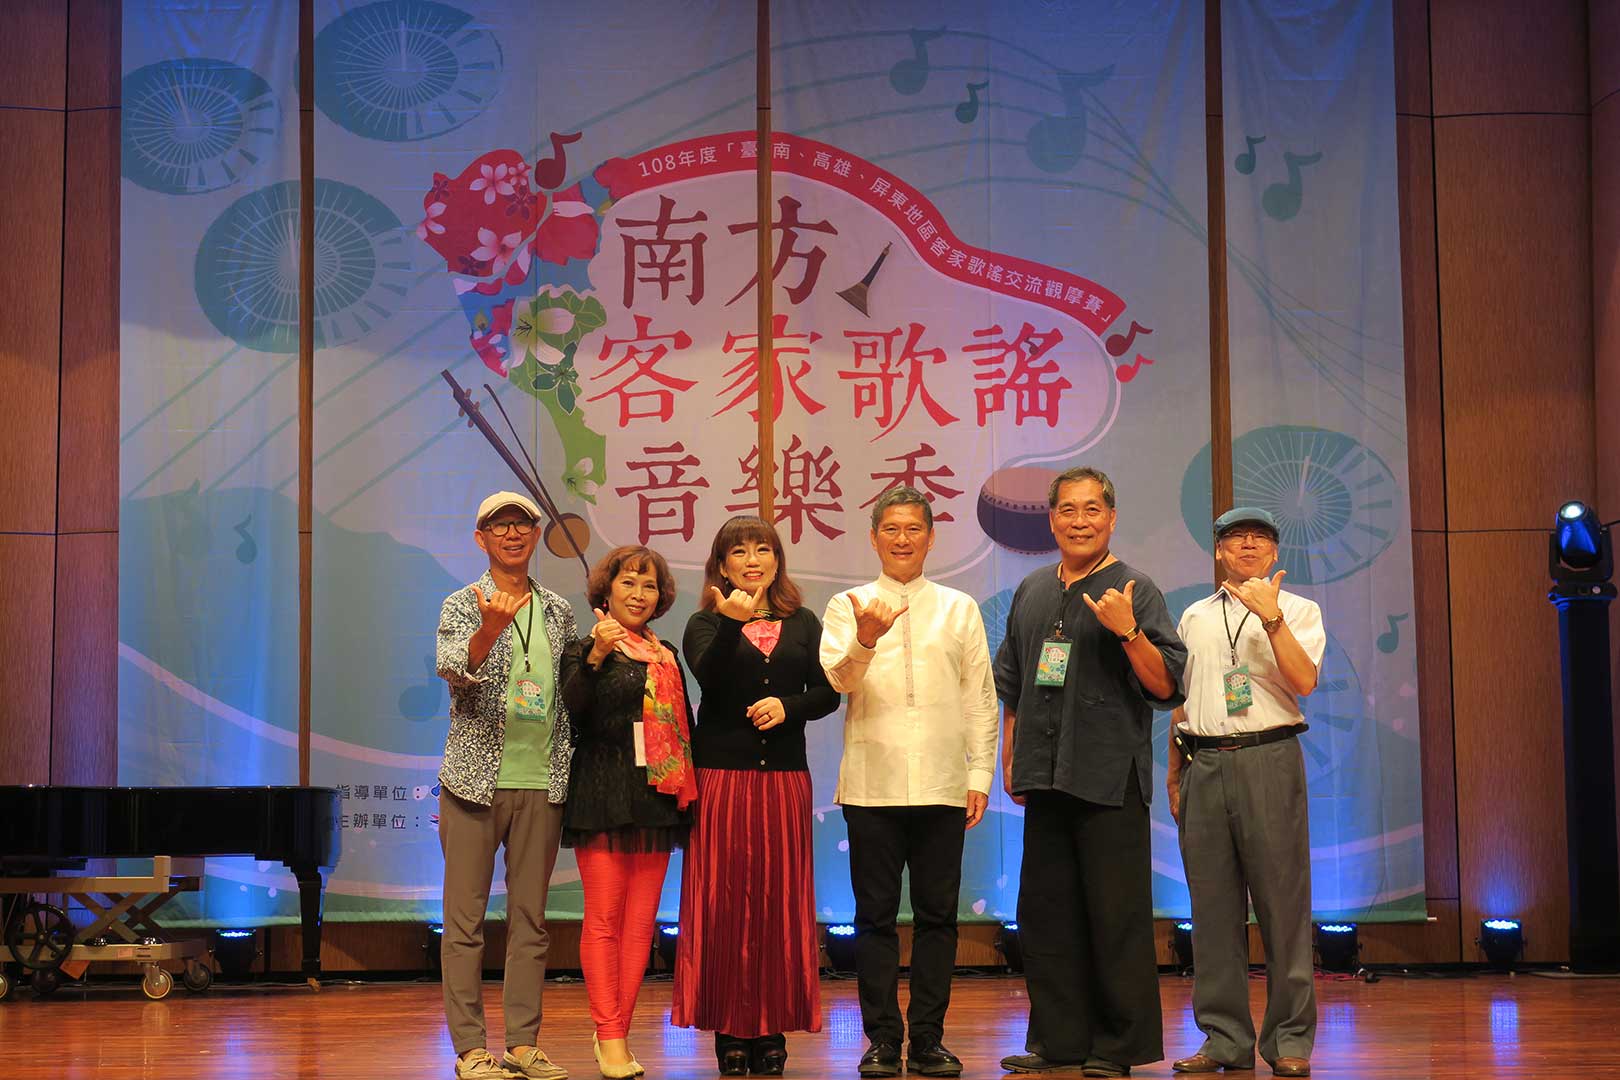 Video of the 2019 Hakka song exchange, observation and learning contest 展示圖